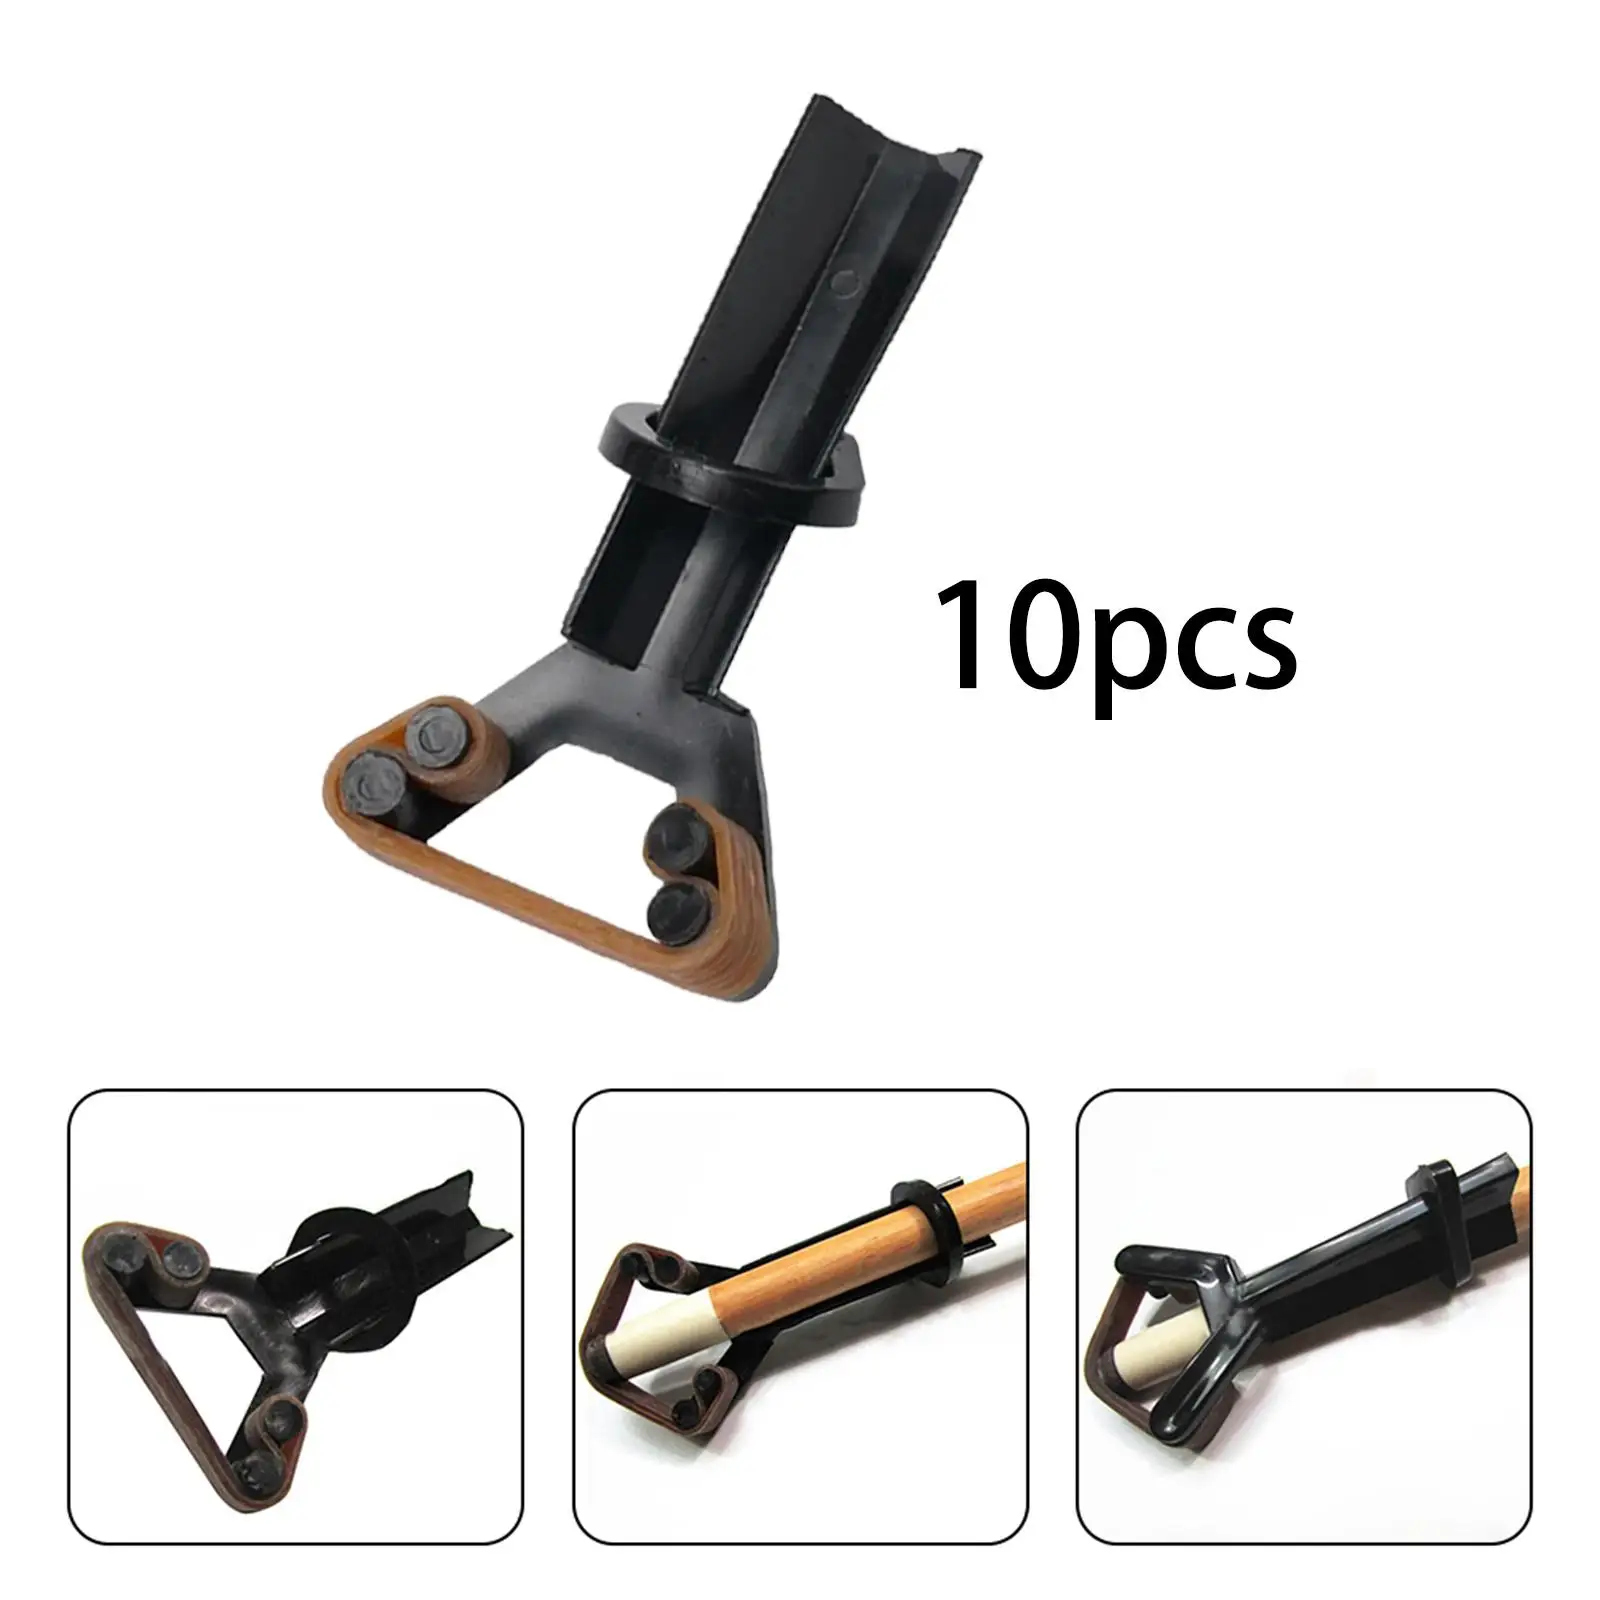 10x Pool Cue Tip Clamp Adults Portable Elastic Replacement Y Shaped Billiard Cue Tip Clamp for Games Player Snooker Indoor Home